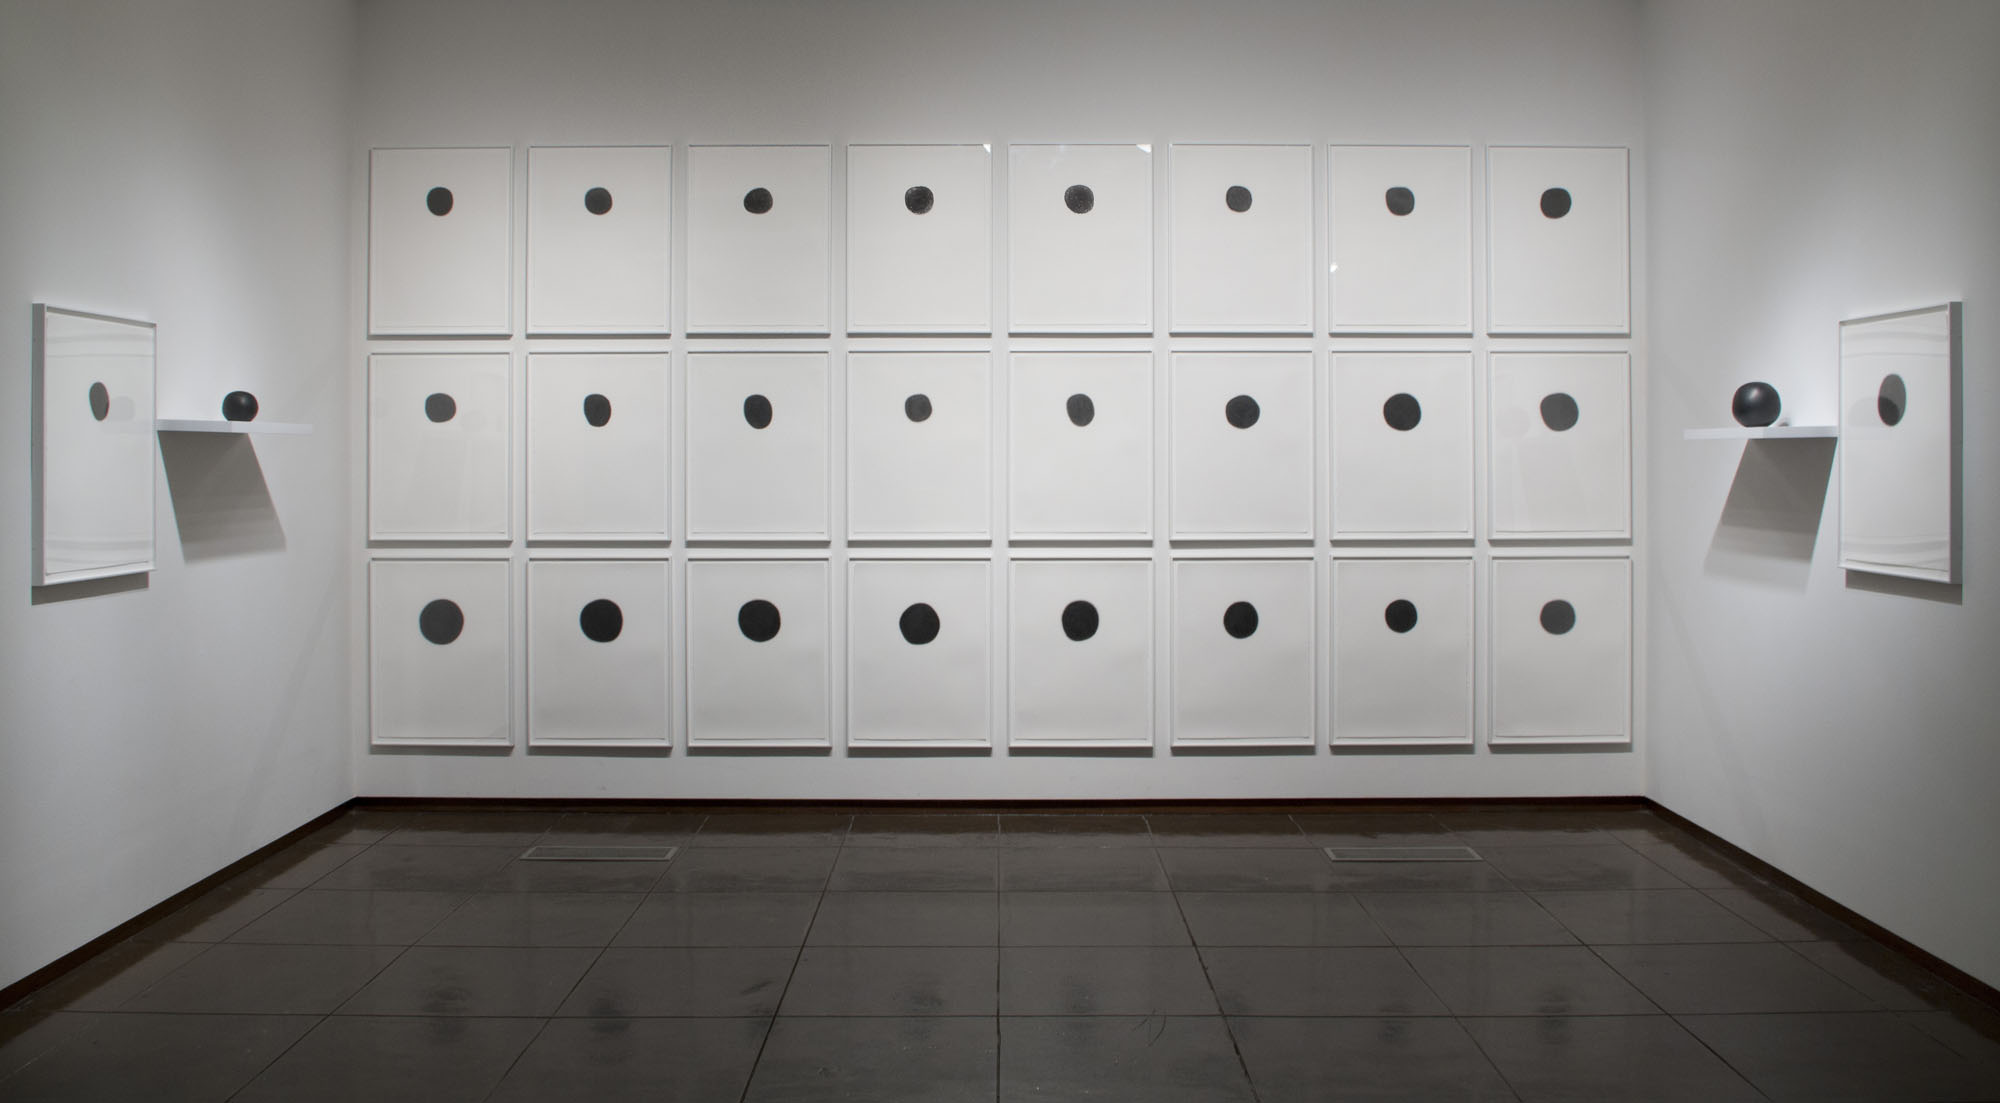   Alcoves 12.5 (installation view, New Mexico Museum of Art, 2015)   Daily Practice: Circle Drawings, Day 1-26, 2010, Graphite pencil on paper&nbsp;   Ucross Sphere no.1 and no. 26, 2010, Solid Graphite 